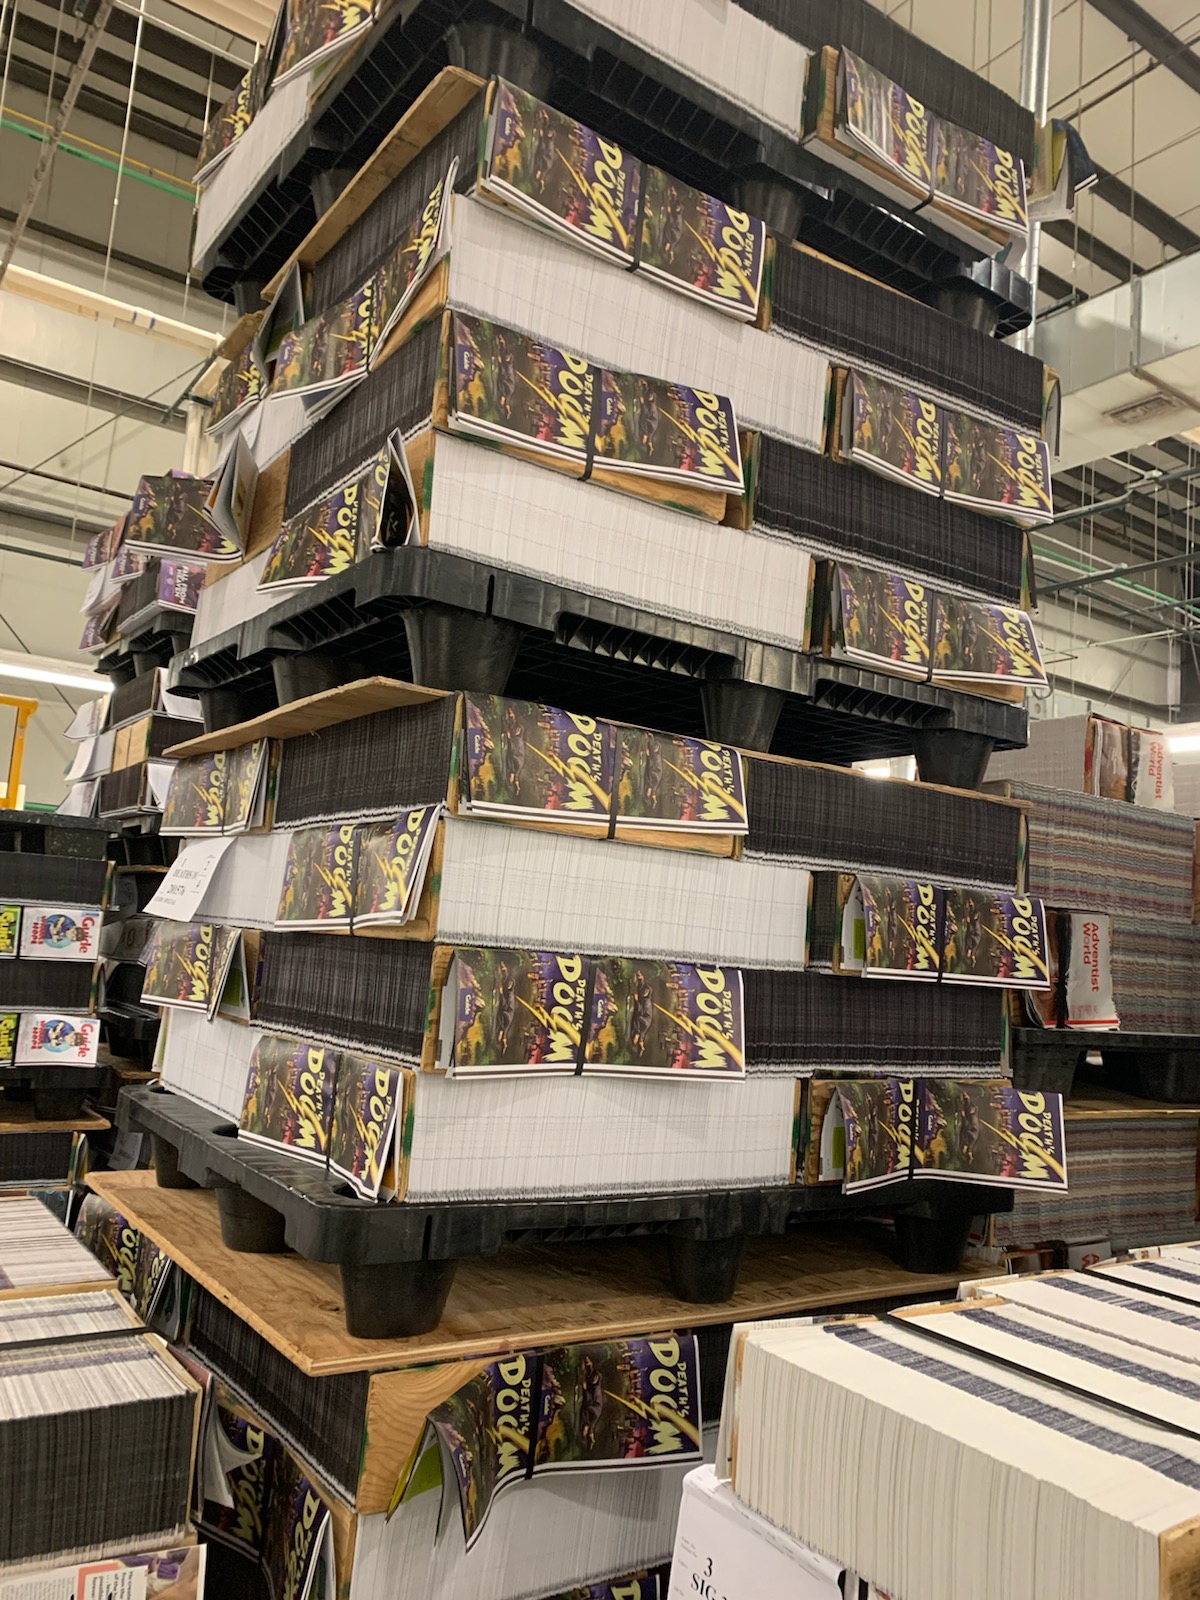 At the Pacific Press Publishing Association, pallets of Guide magazine's special issue "Death's Doom" are ready to ship. 